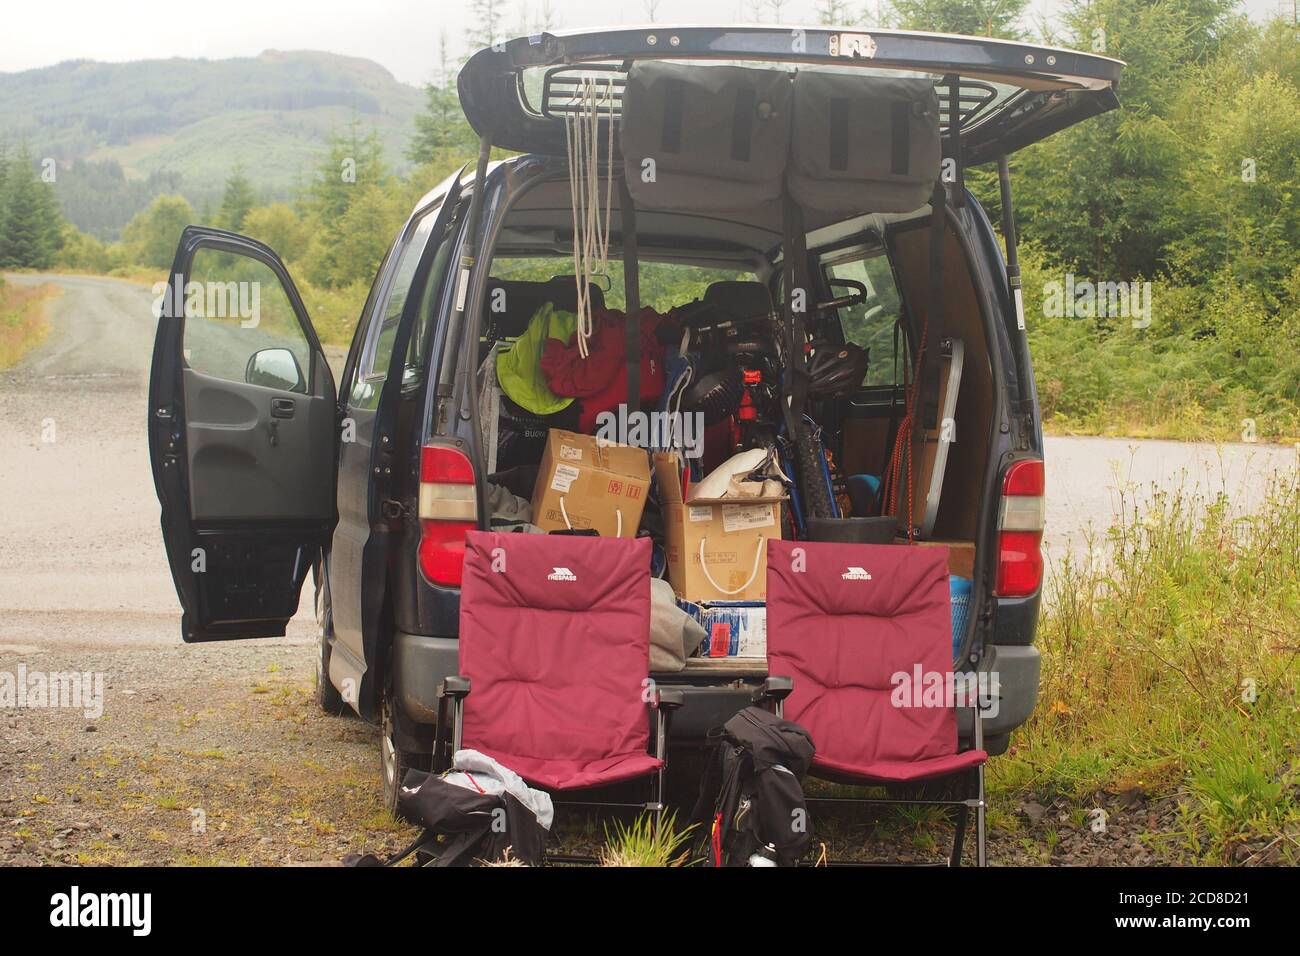 Looking into the open door of a mini van filled with holiday, staycation, items including water container, cool box,coats, shoes and umbrellas Stock Photo